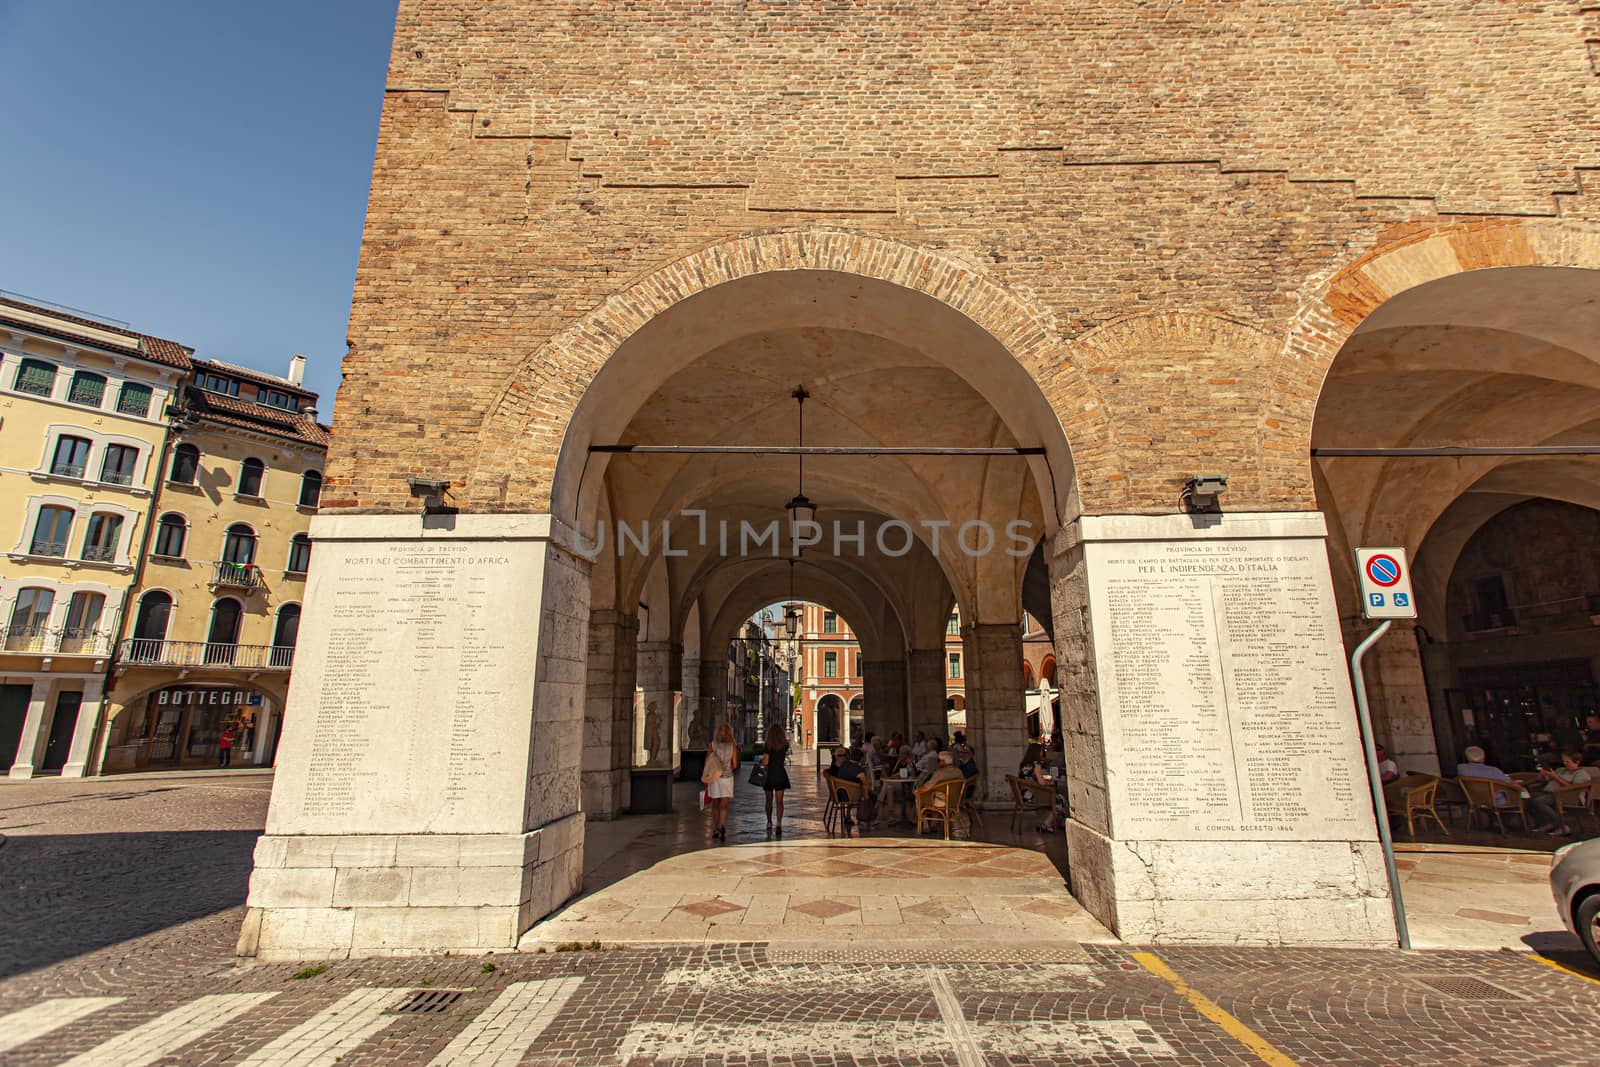 TREVISO, ITALY 13 AUGUST 2020: Historical buildings with arcades in Treviso city center in Italy